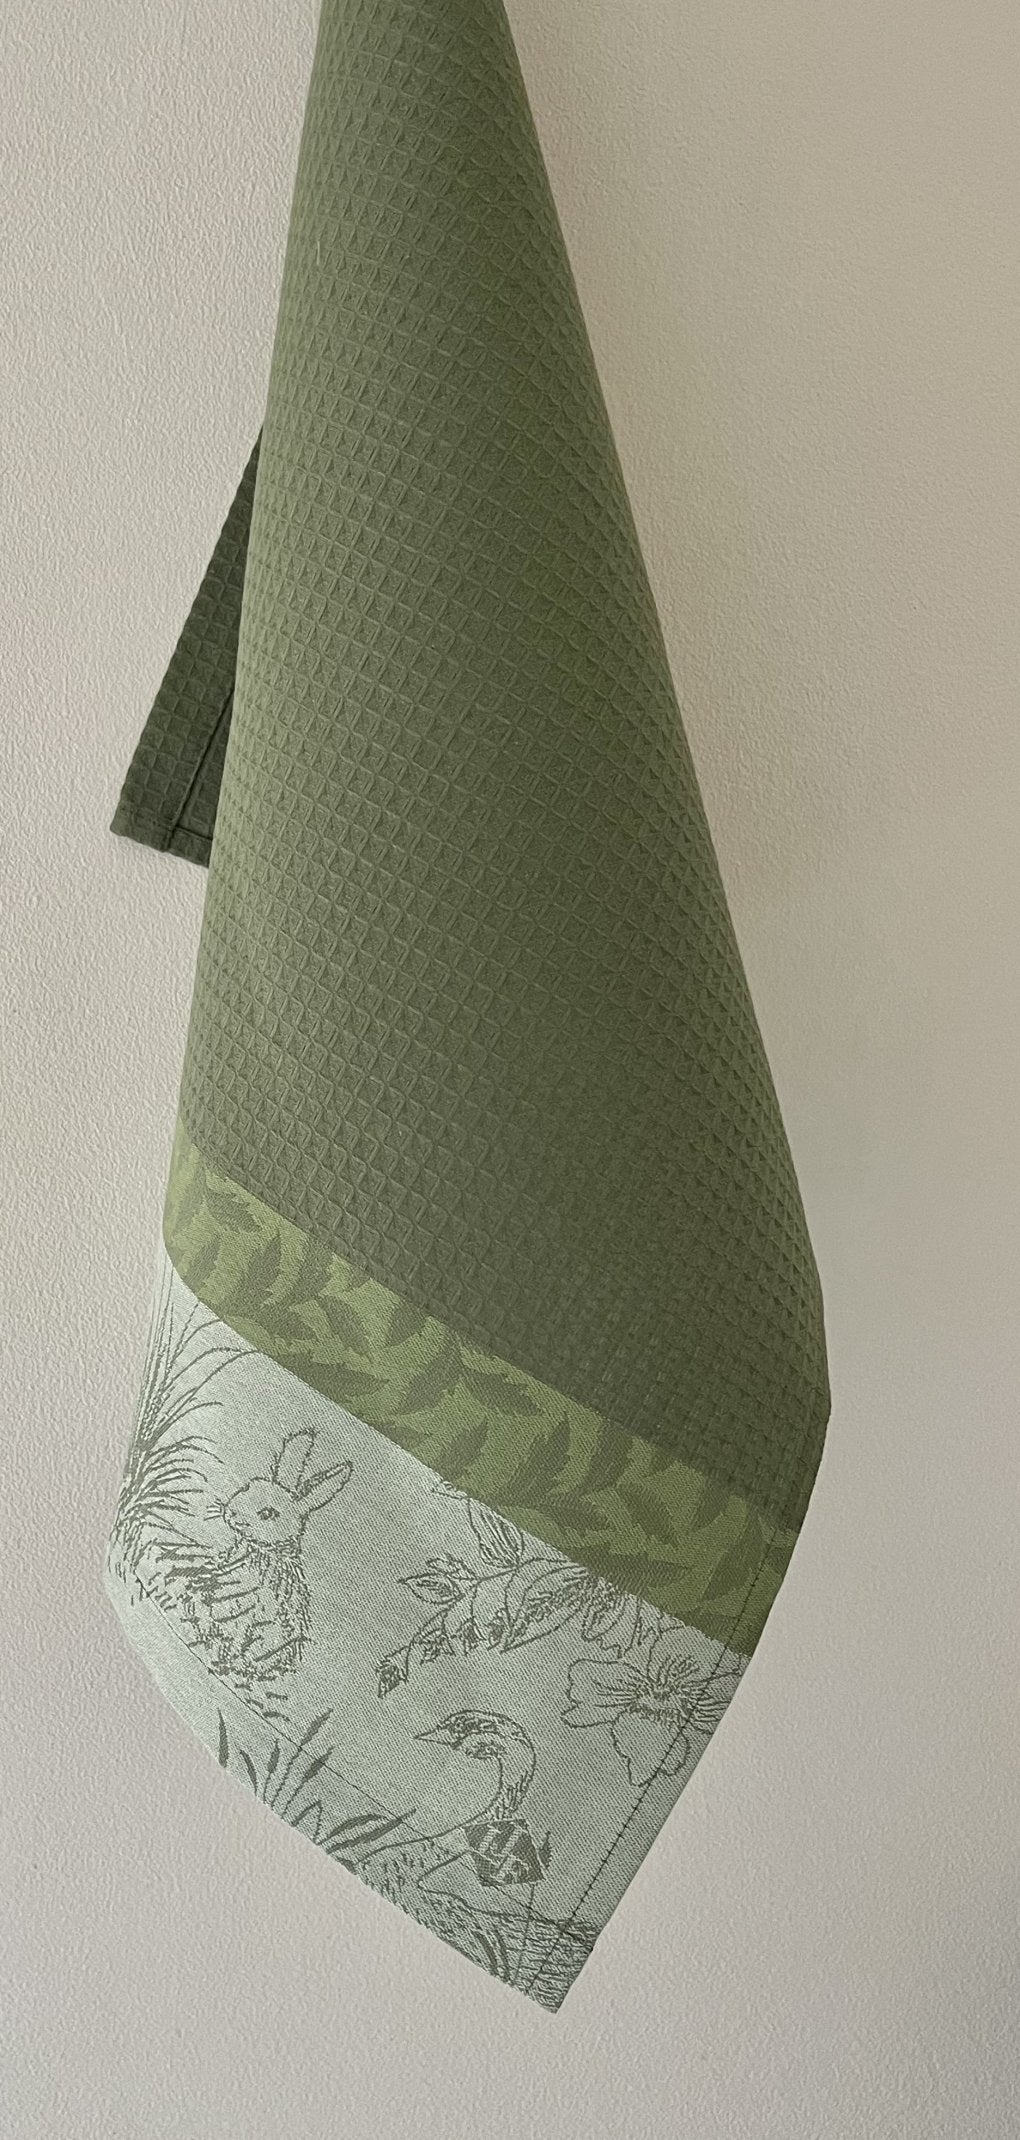 Jacquard Francais "Josephine" (Green), Woven cotton hand towel. Made in France.